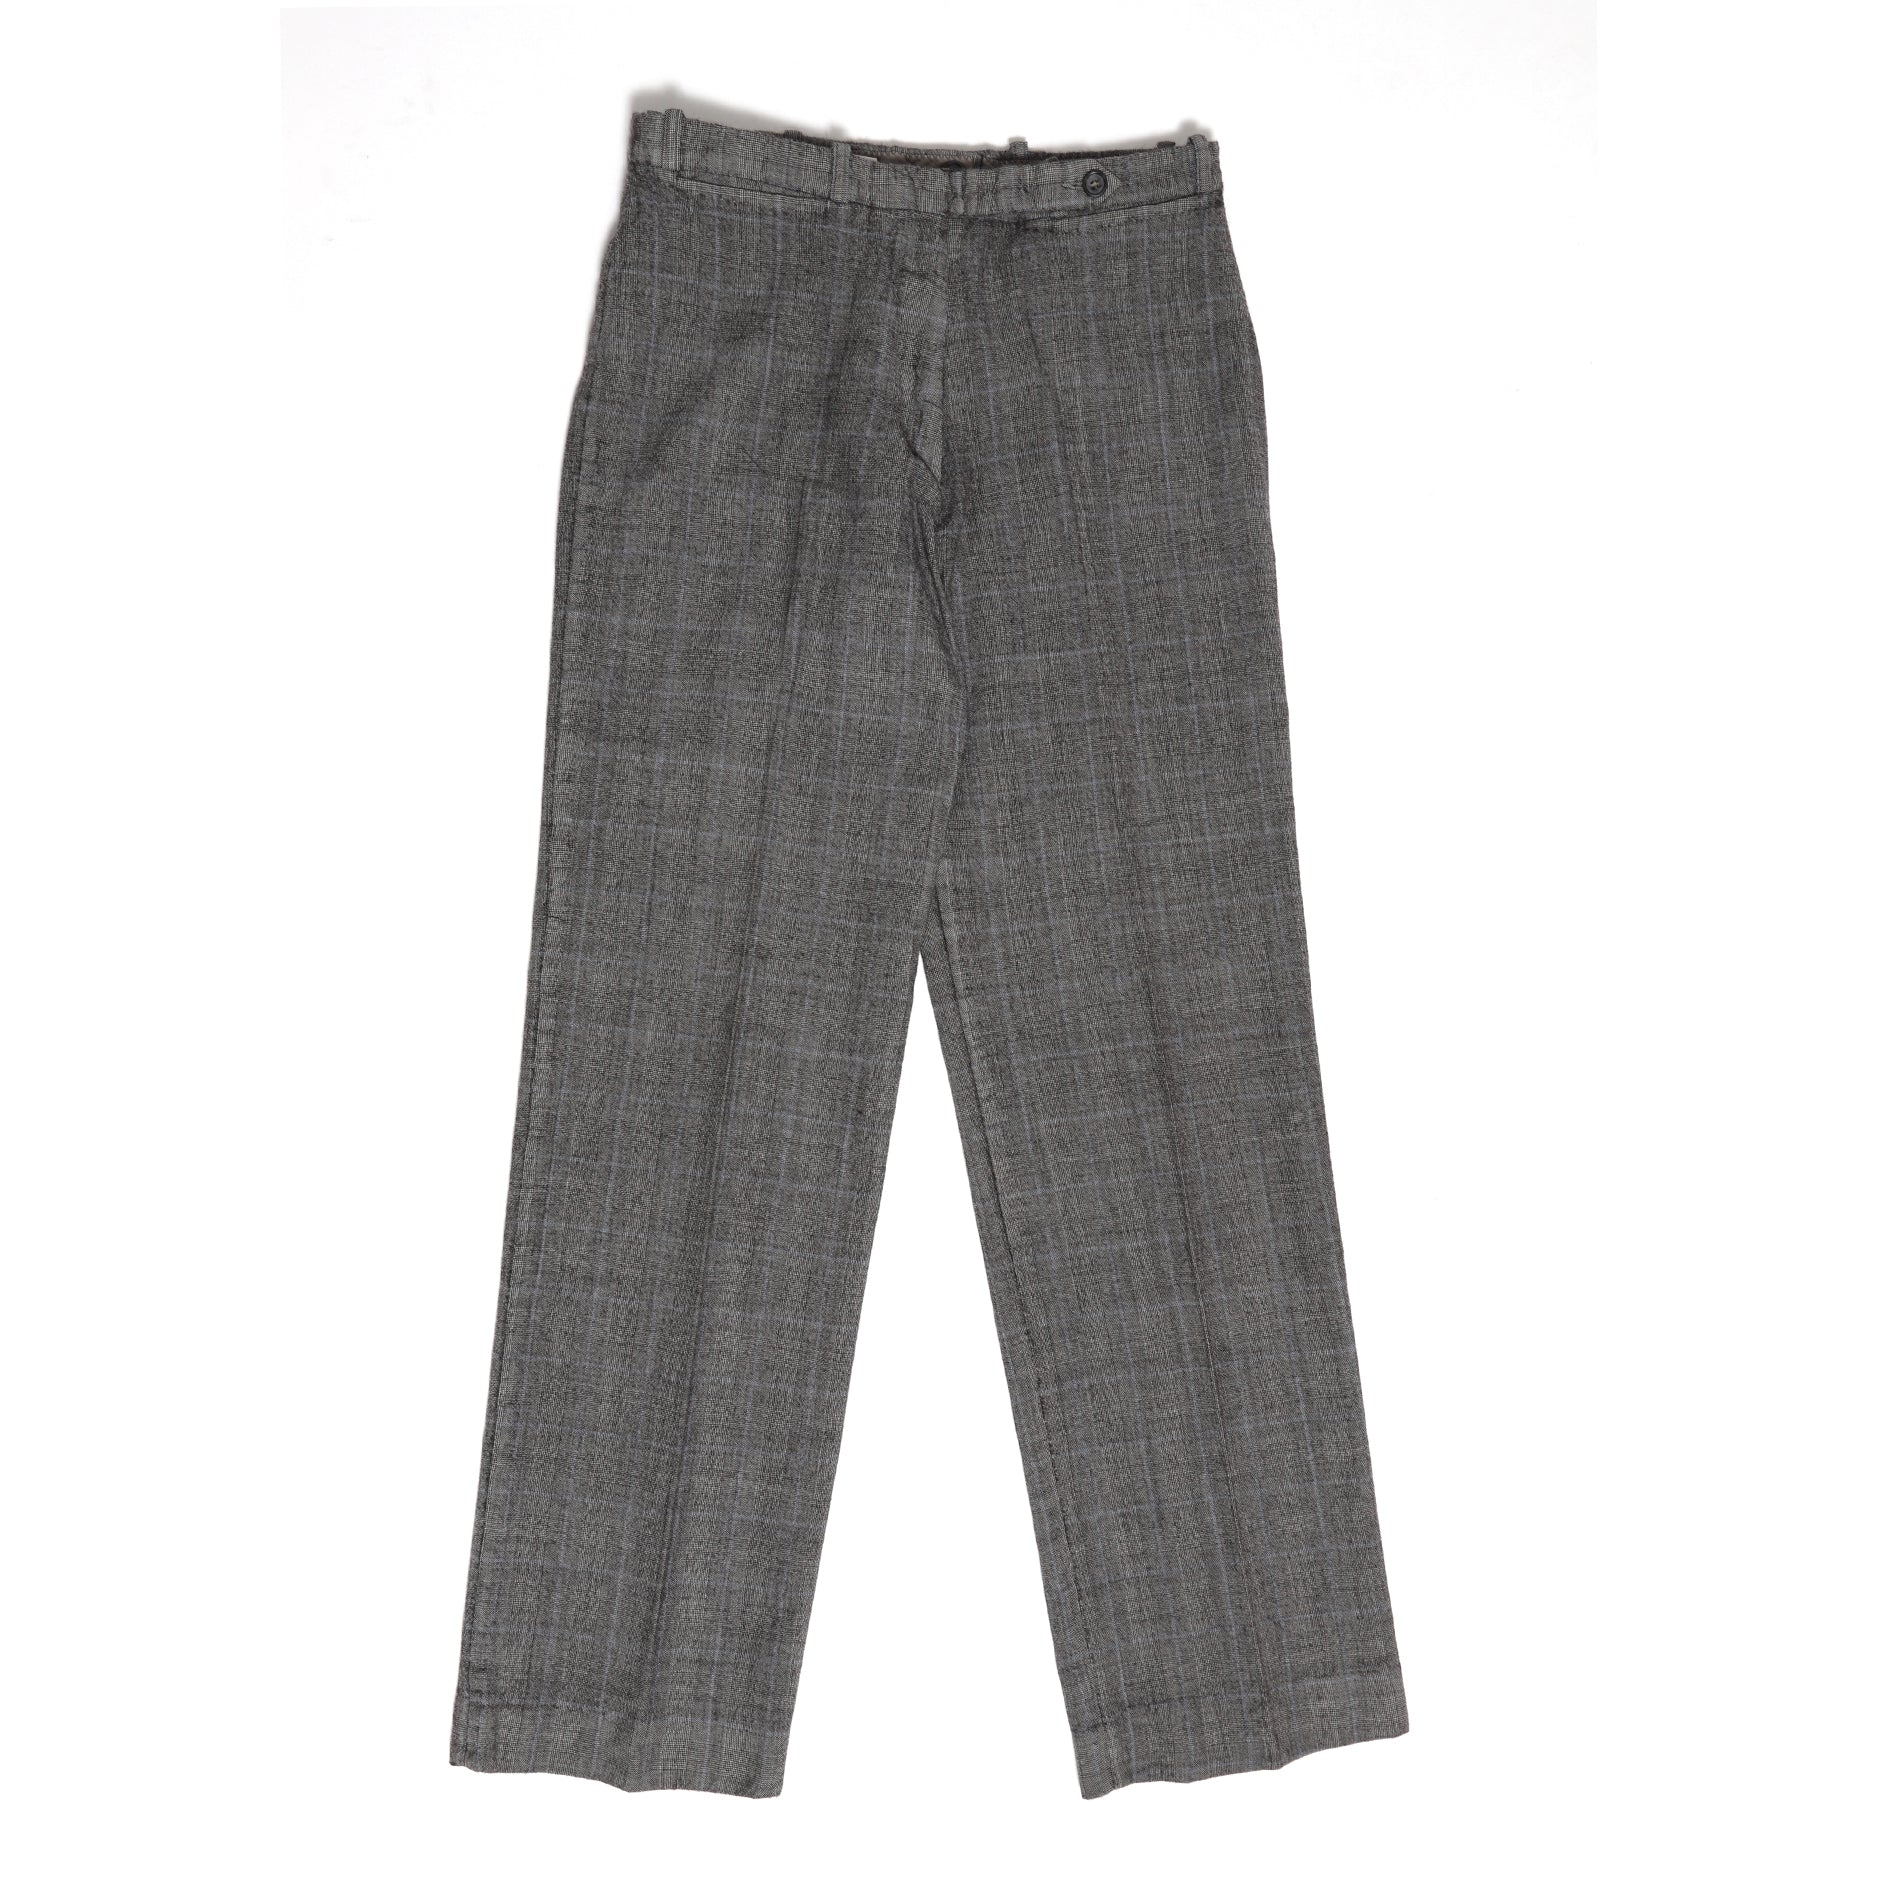 Maison Martin Margiela SS01 Reversed Checked Double Front Pants